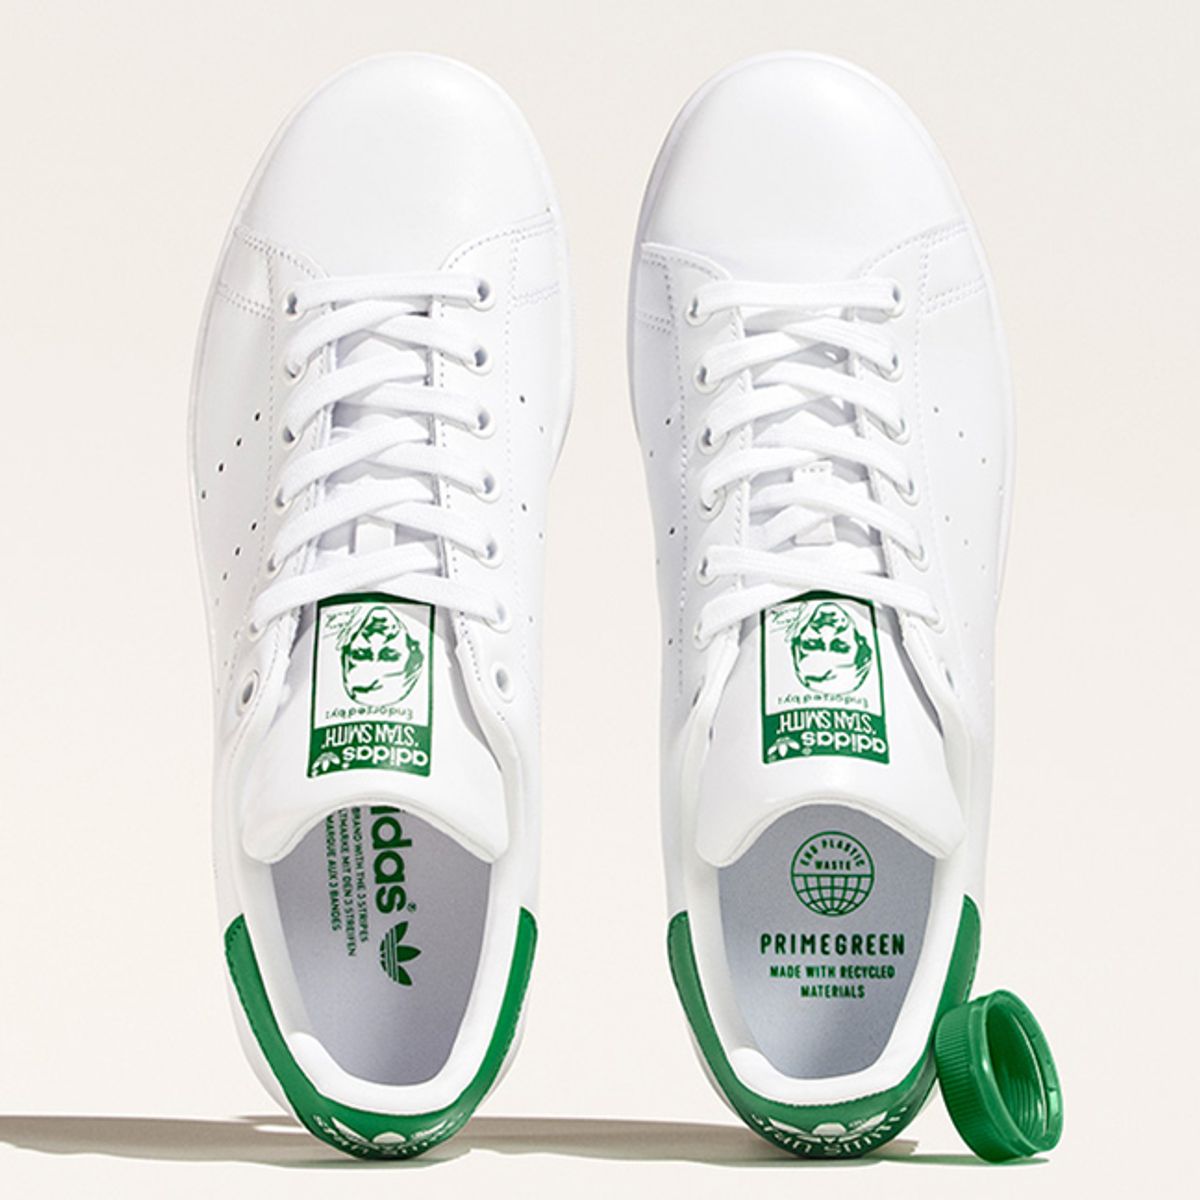 Odorless clumsy tetrahedron Real Talk: adidas Stan Smith, Forever - Sneaker Freaker